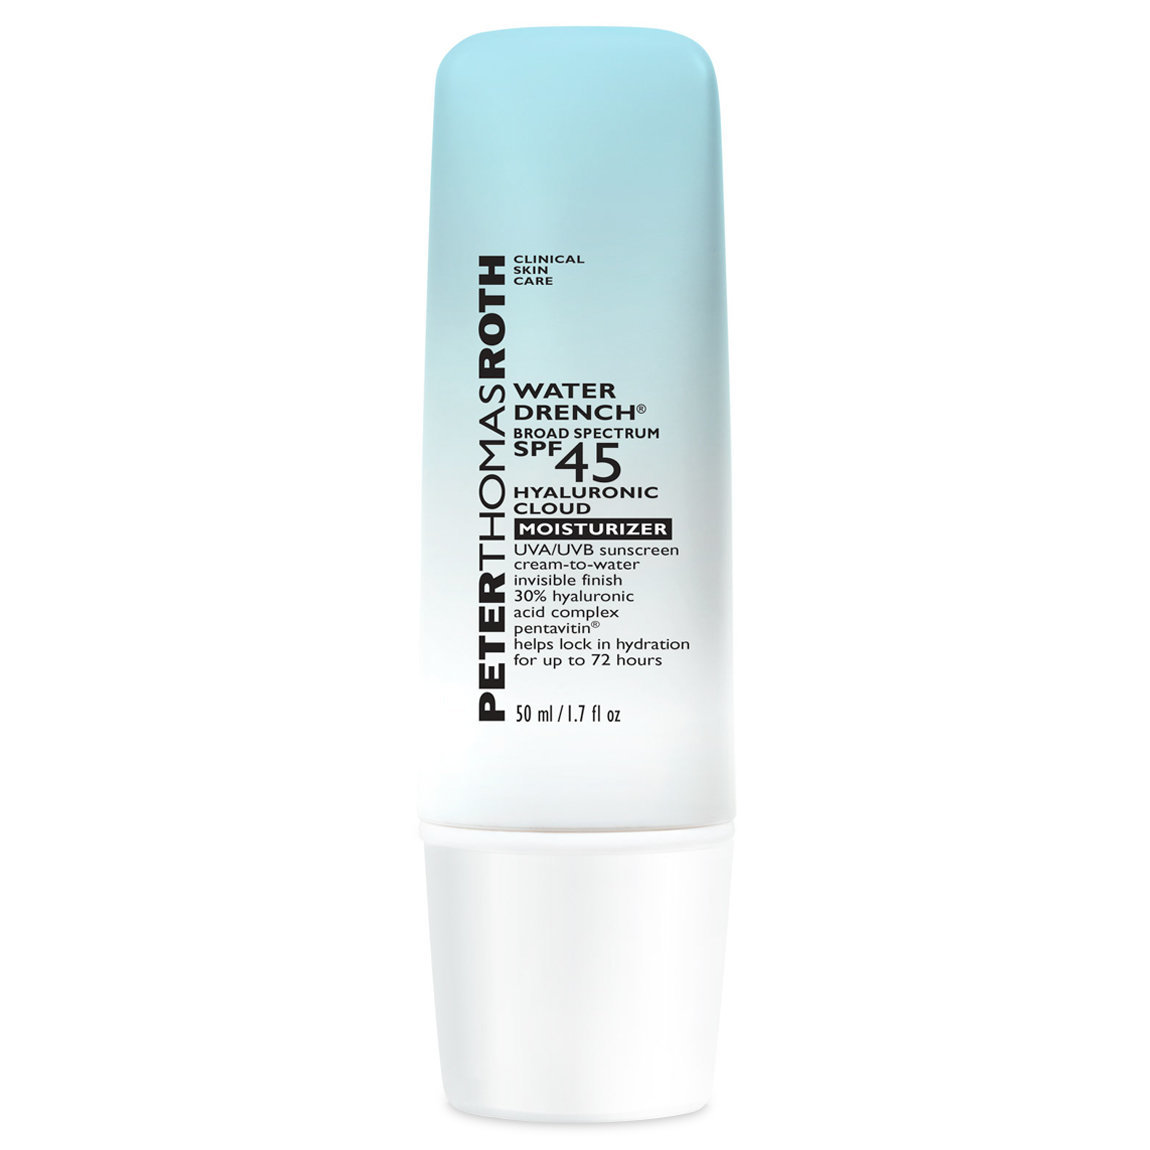 Peter Thomas Roth Water Drench Broad Spectrum SPF 45 Hyaluronic Cloud Moisturizer alternative view 1 - product swatch.